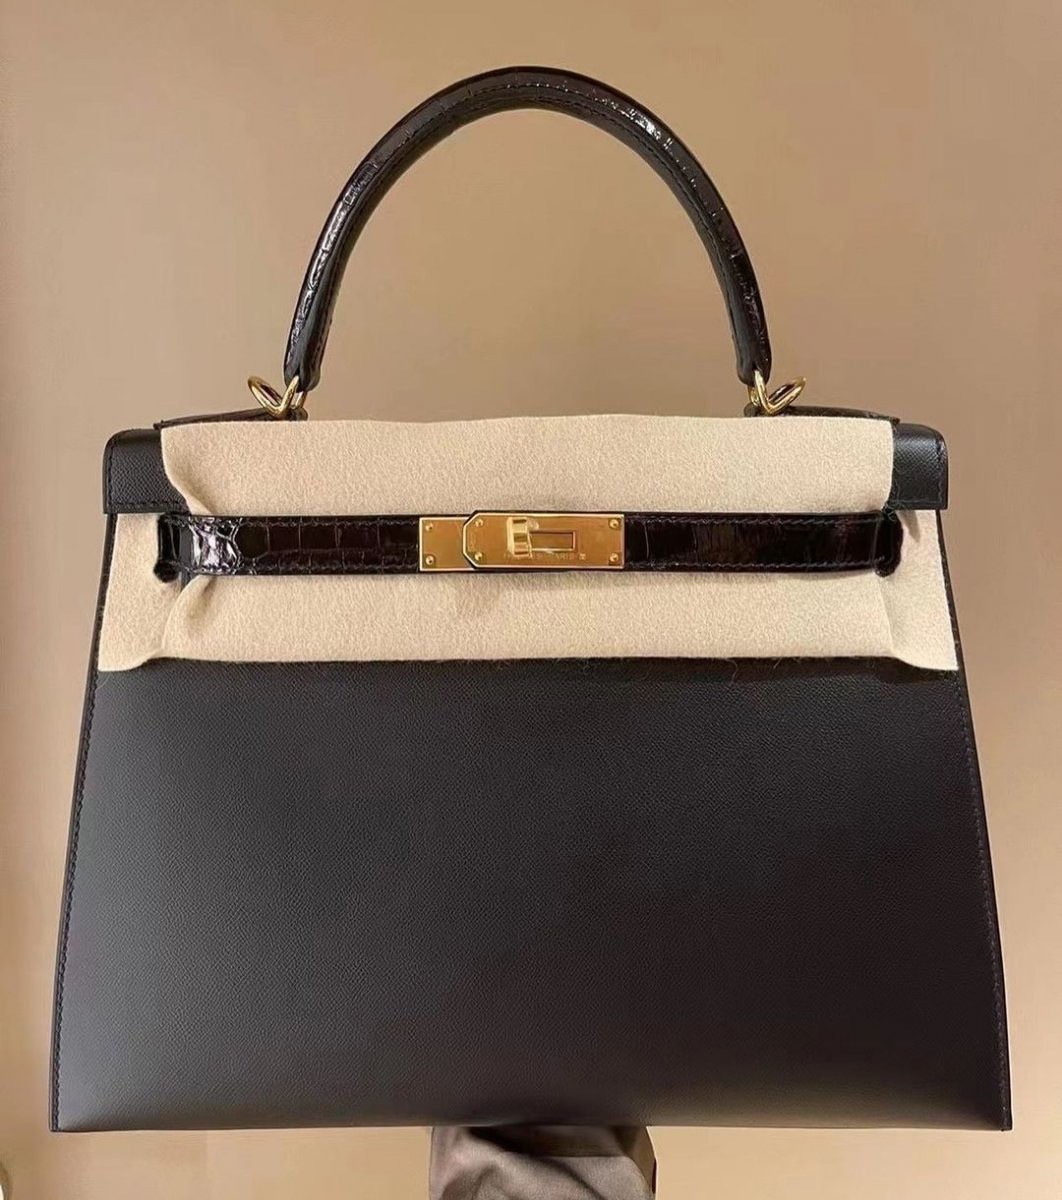 Birkin & Kelly] A unique design that makes you being touched The